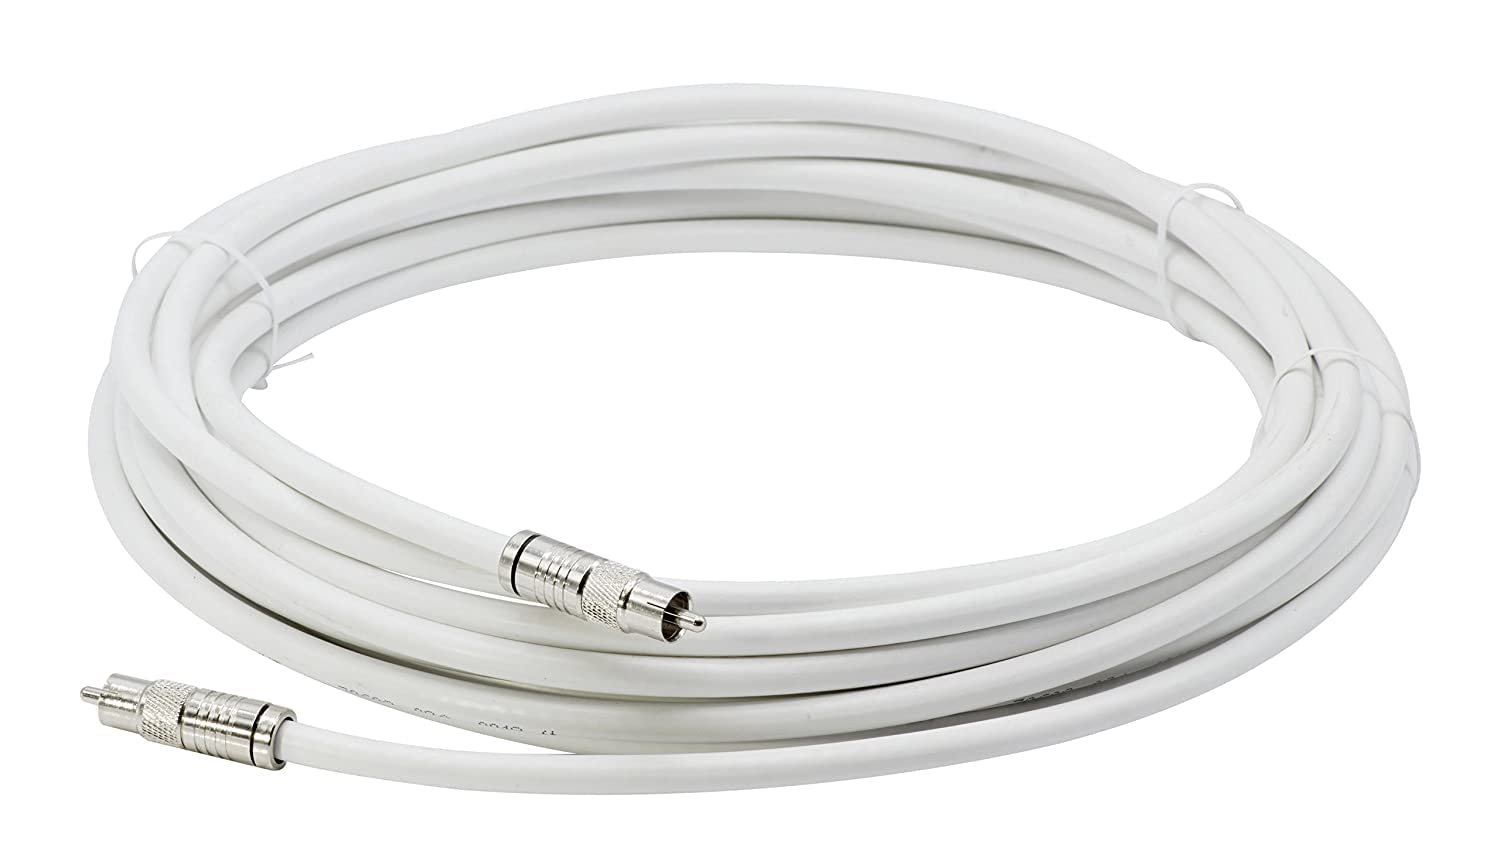 Digital Audio Cable - Digital Coaxial Cable with RCA [...]